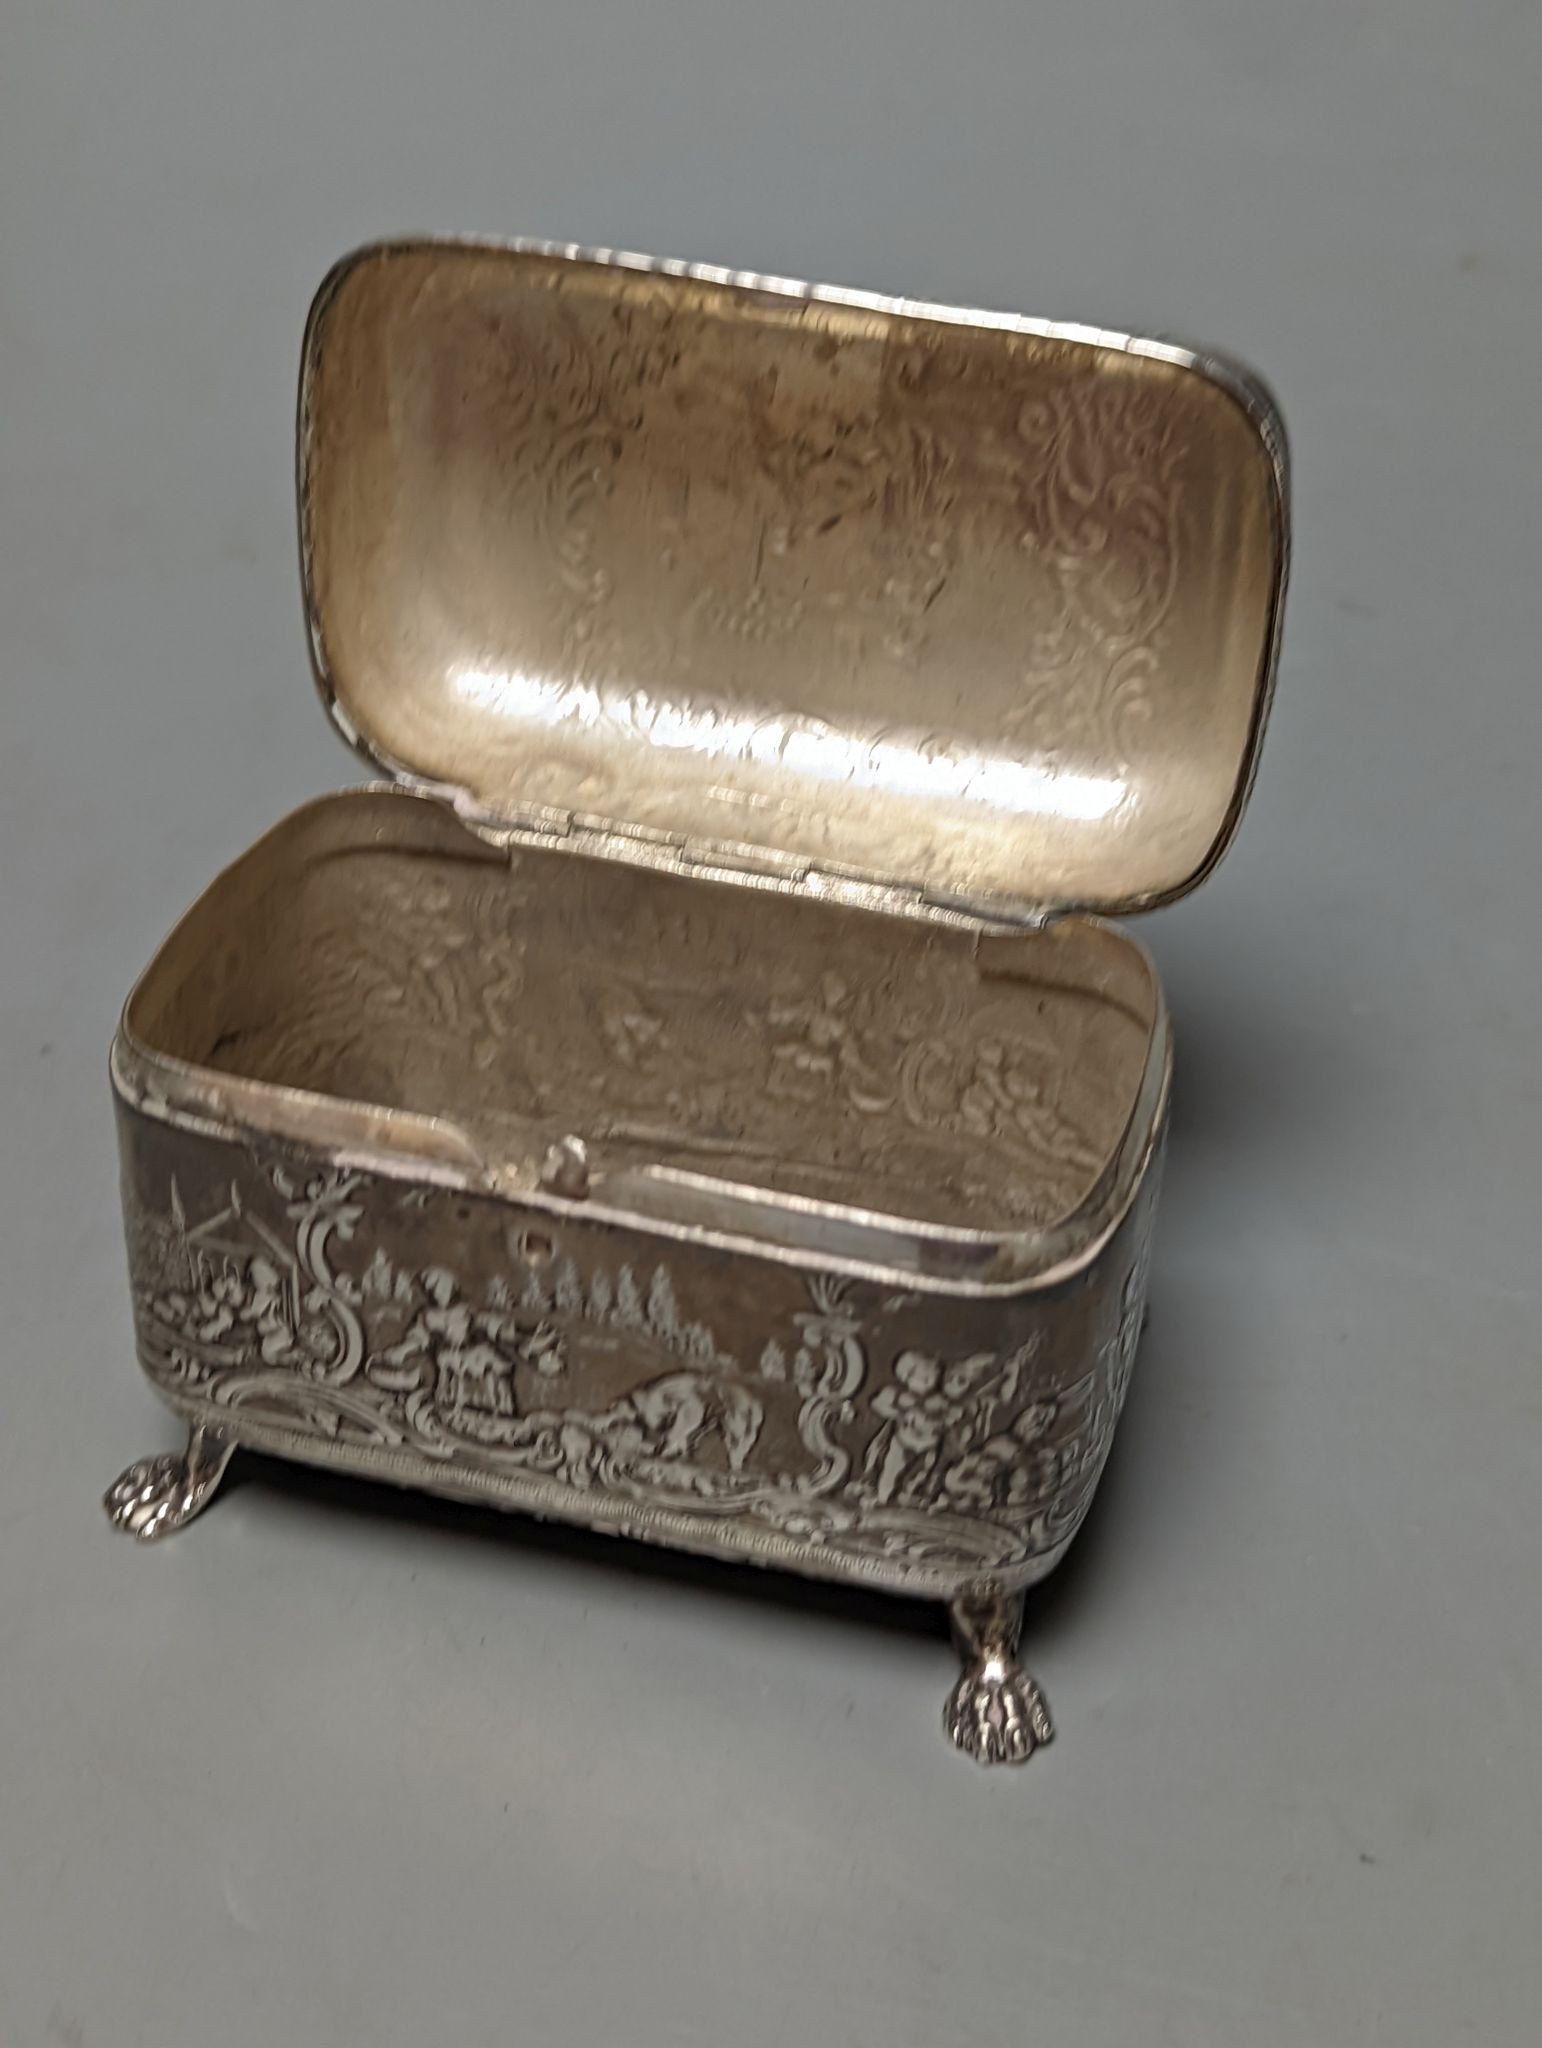 An Edwardian repousse silver mounted photograph frame, Birmingham, 1901, 15.8cm and a small white metal casket.